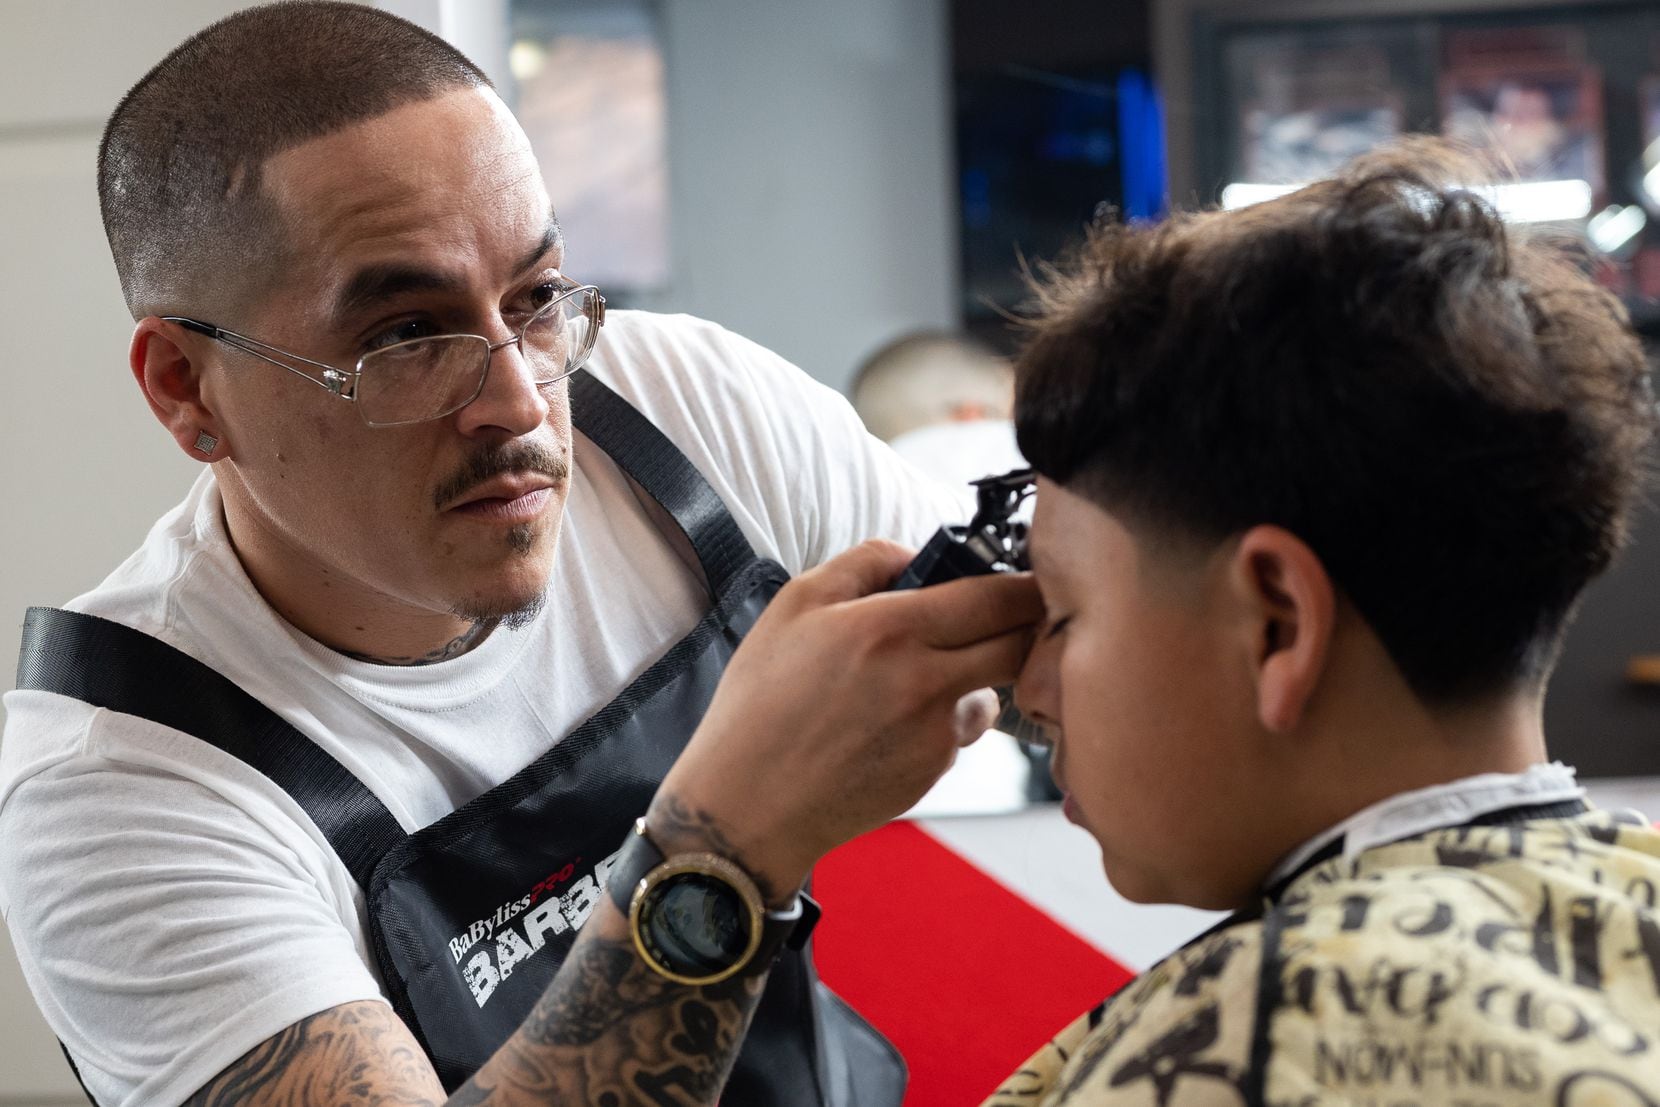 Hairdresser Edgar "E" Montelongo, 35, uses a trimmer to cut the hair of Nathan Cabrera, 12, as he…